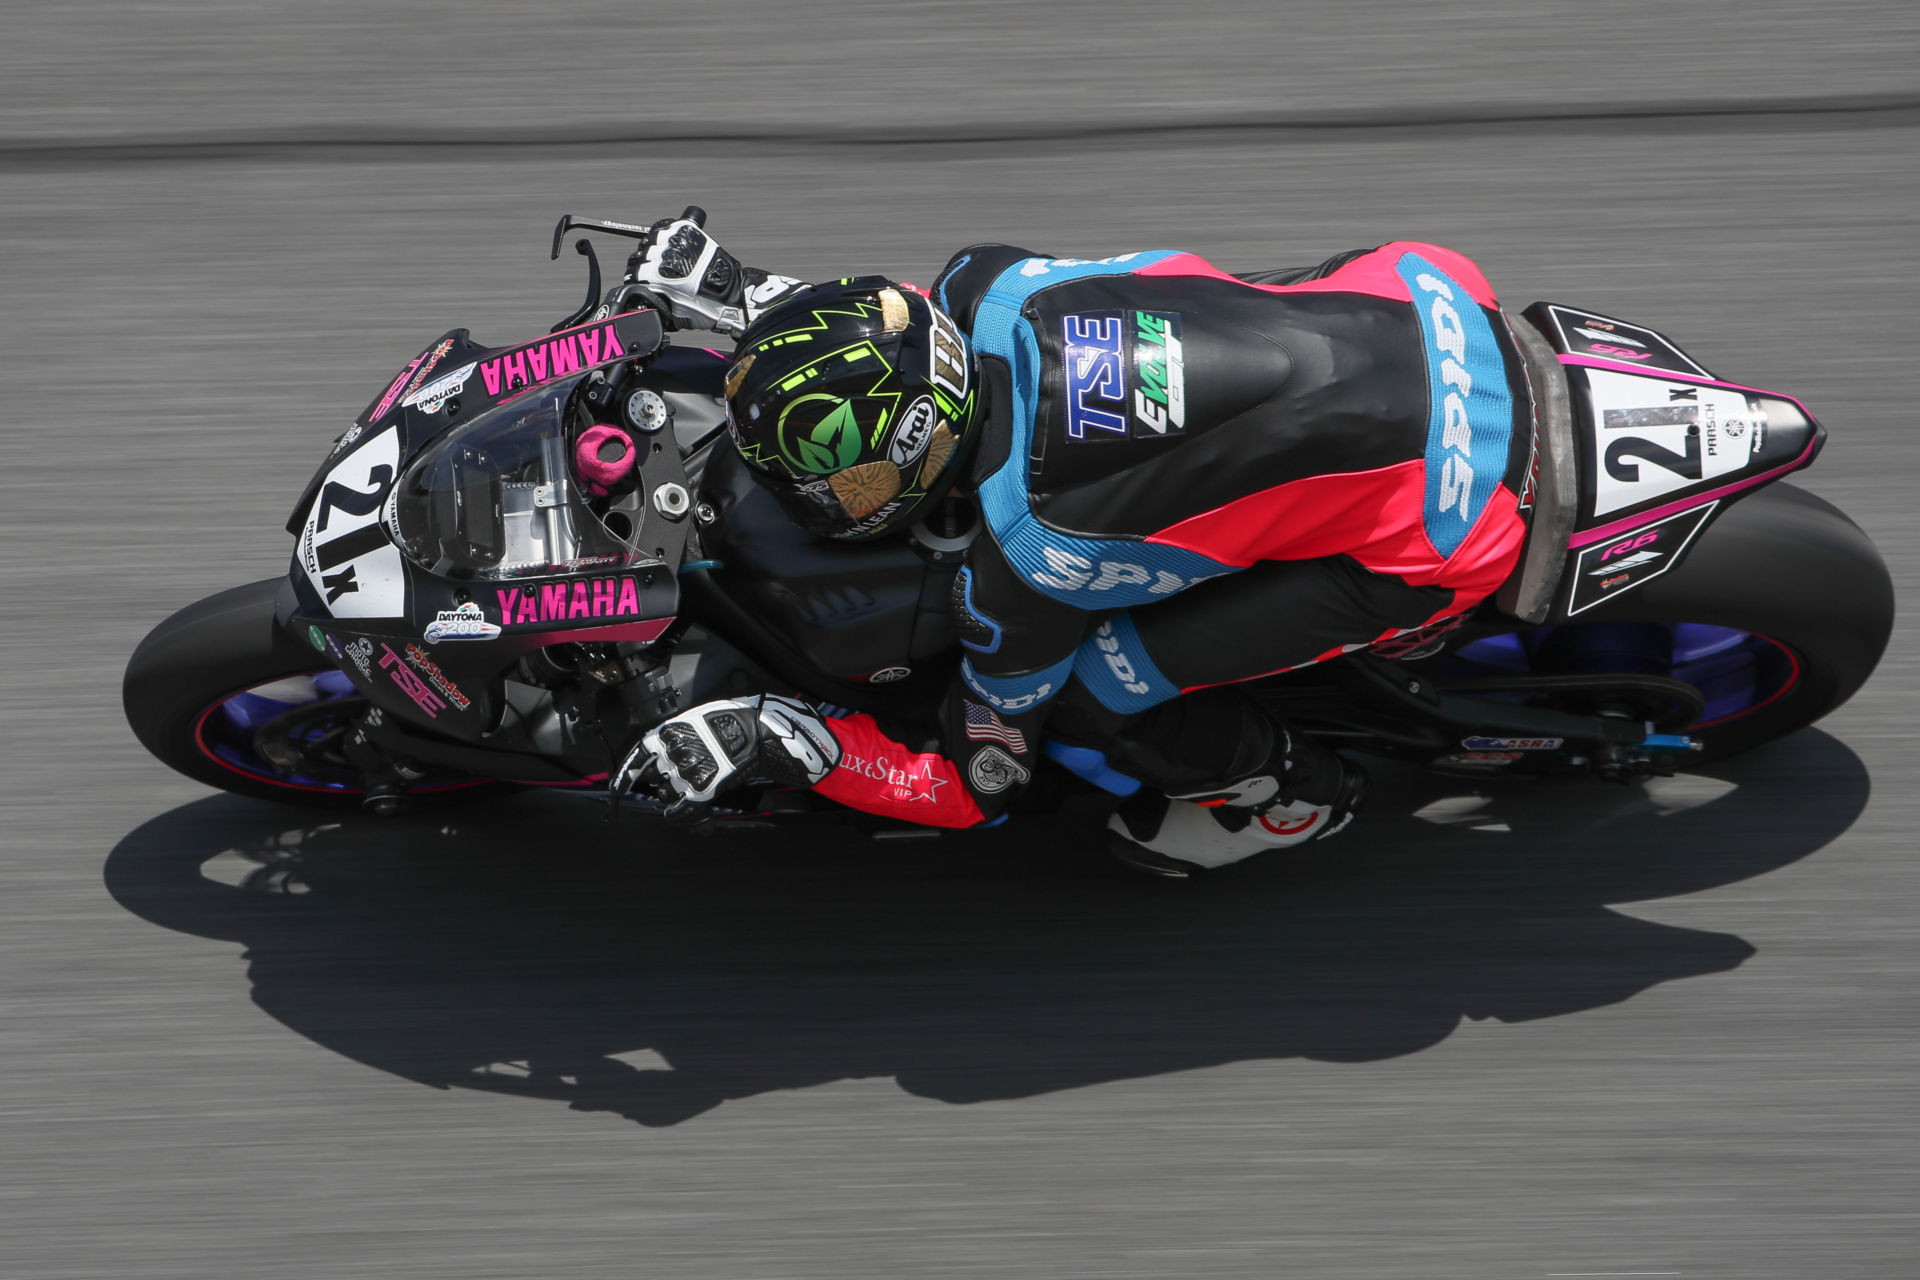 Brandon Paasch (21x) during practice for the 2020 Daytona 200. Photo by Brian J. Nelson.